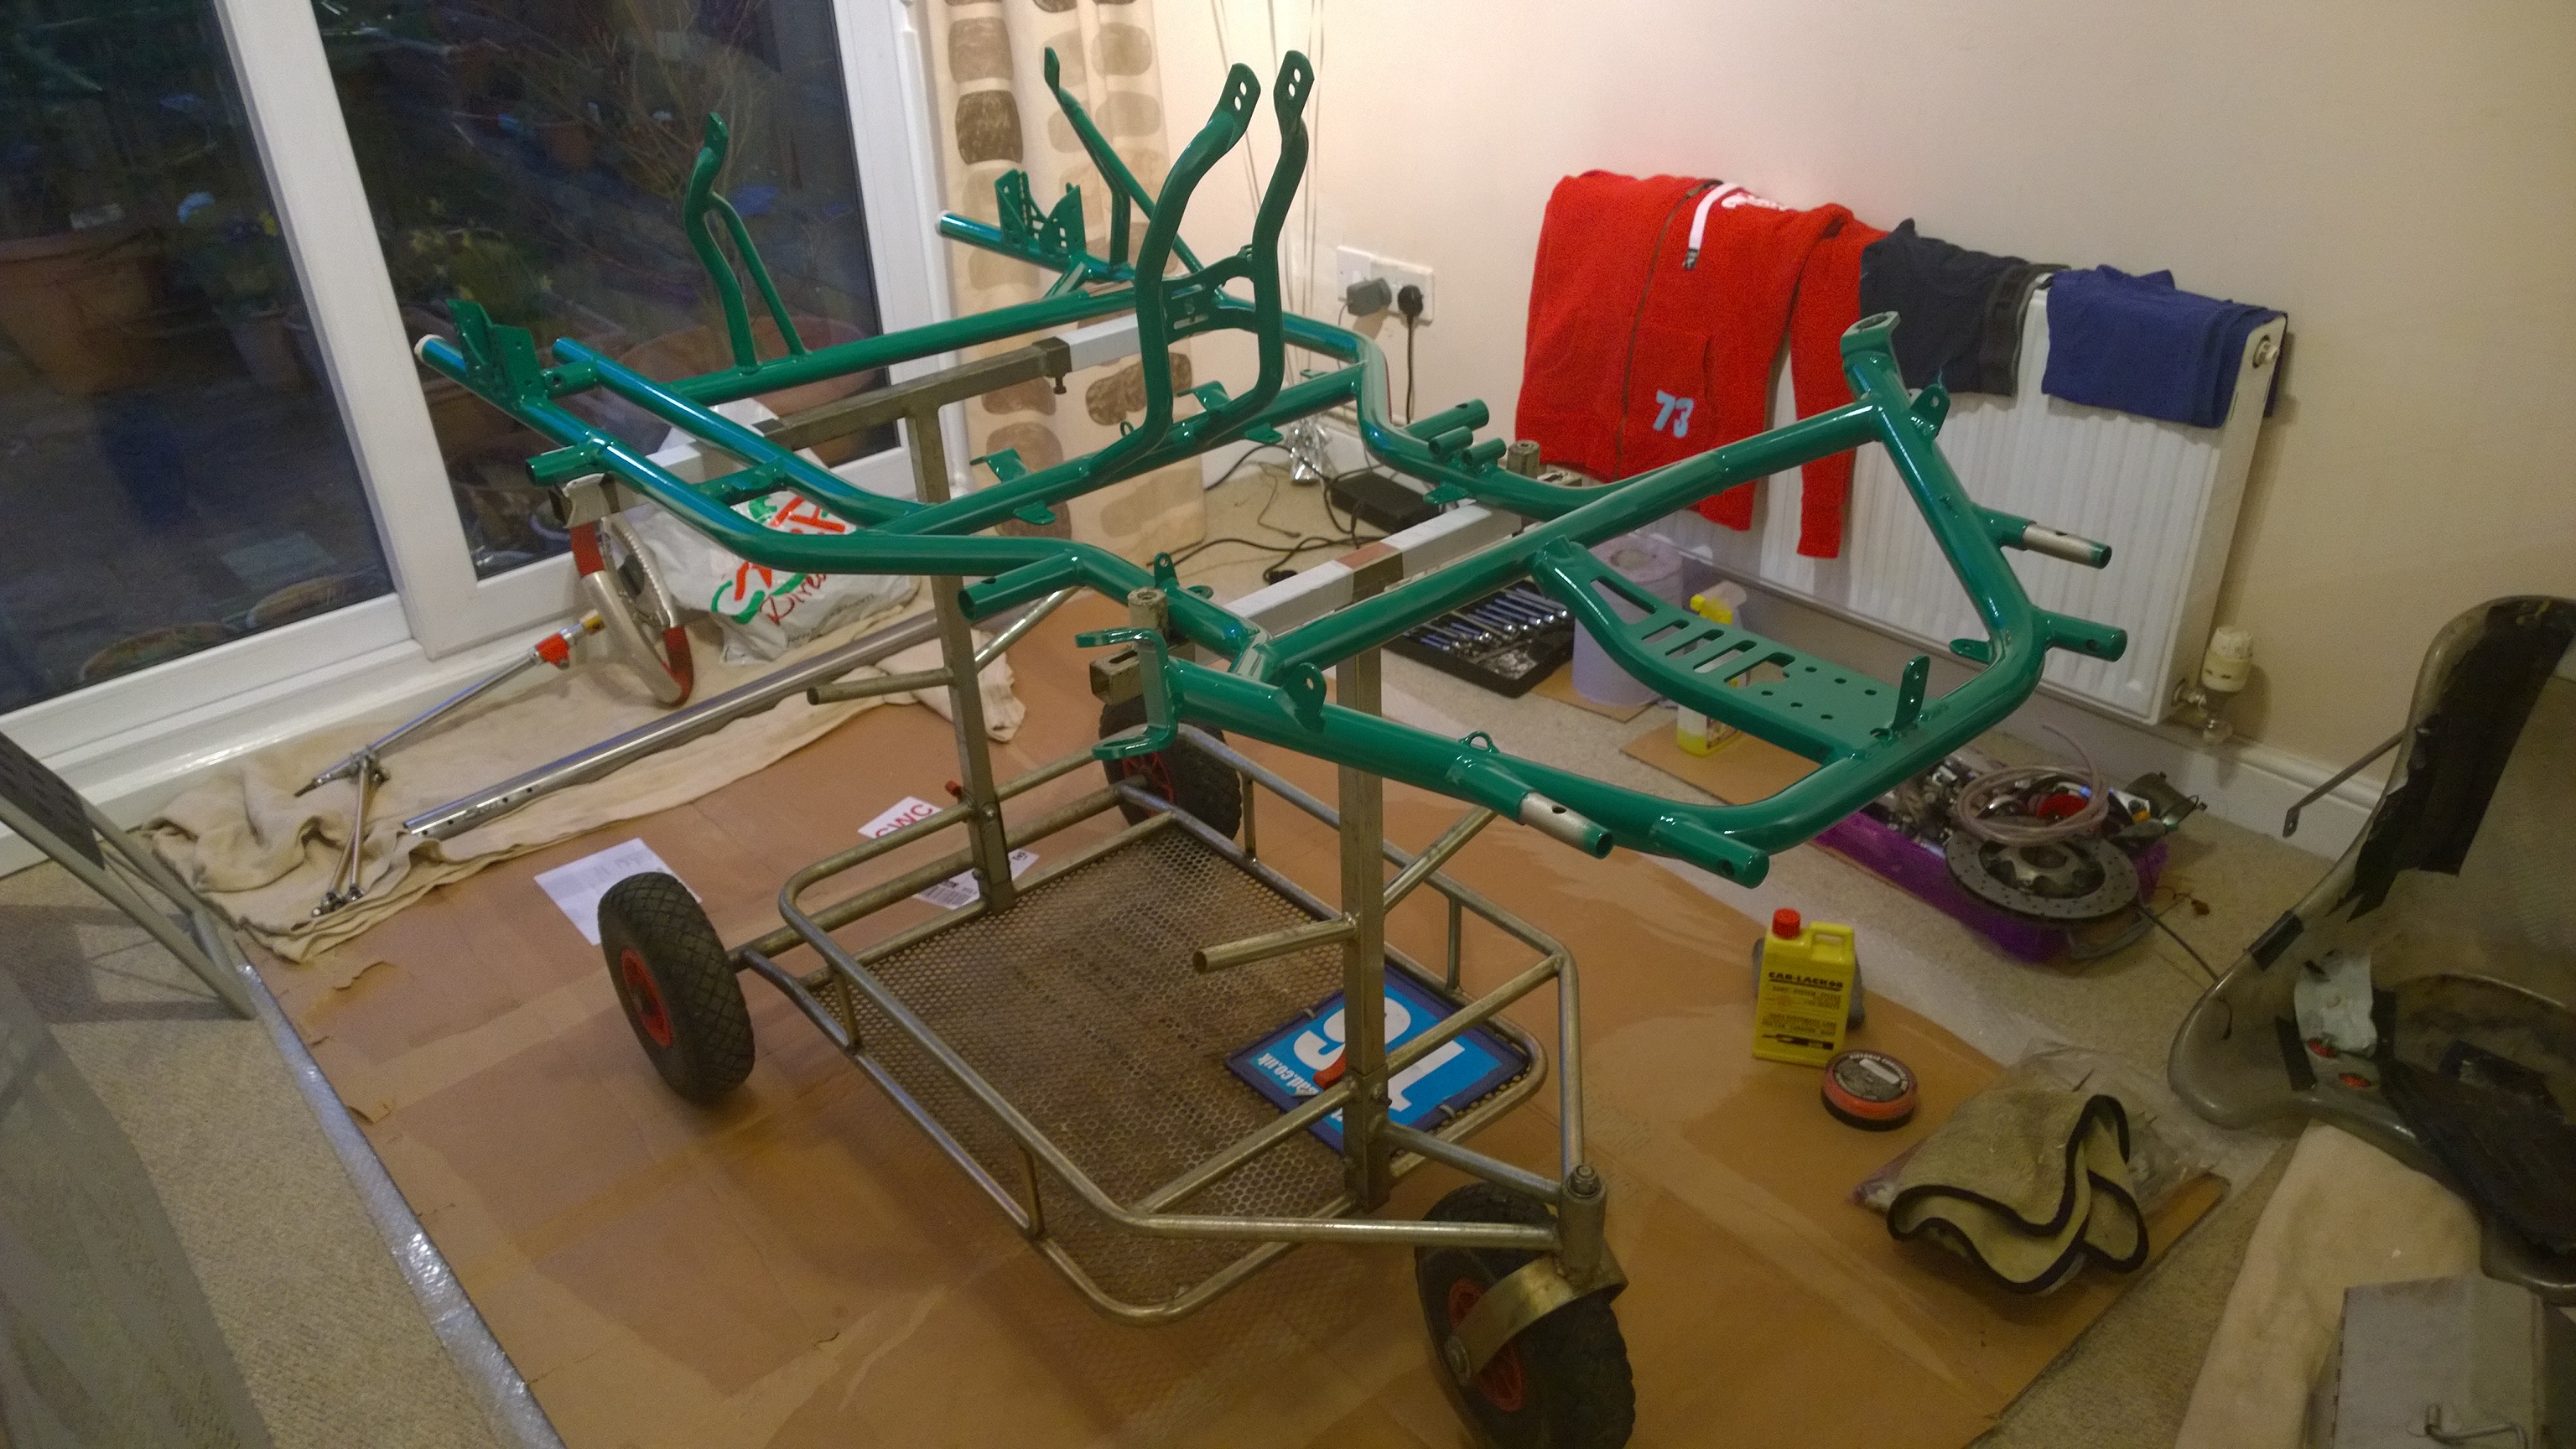 I actually got permission to build the kart indoors - I shit you not!